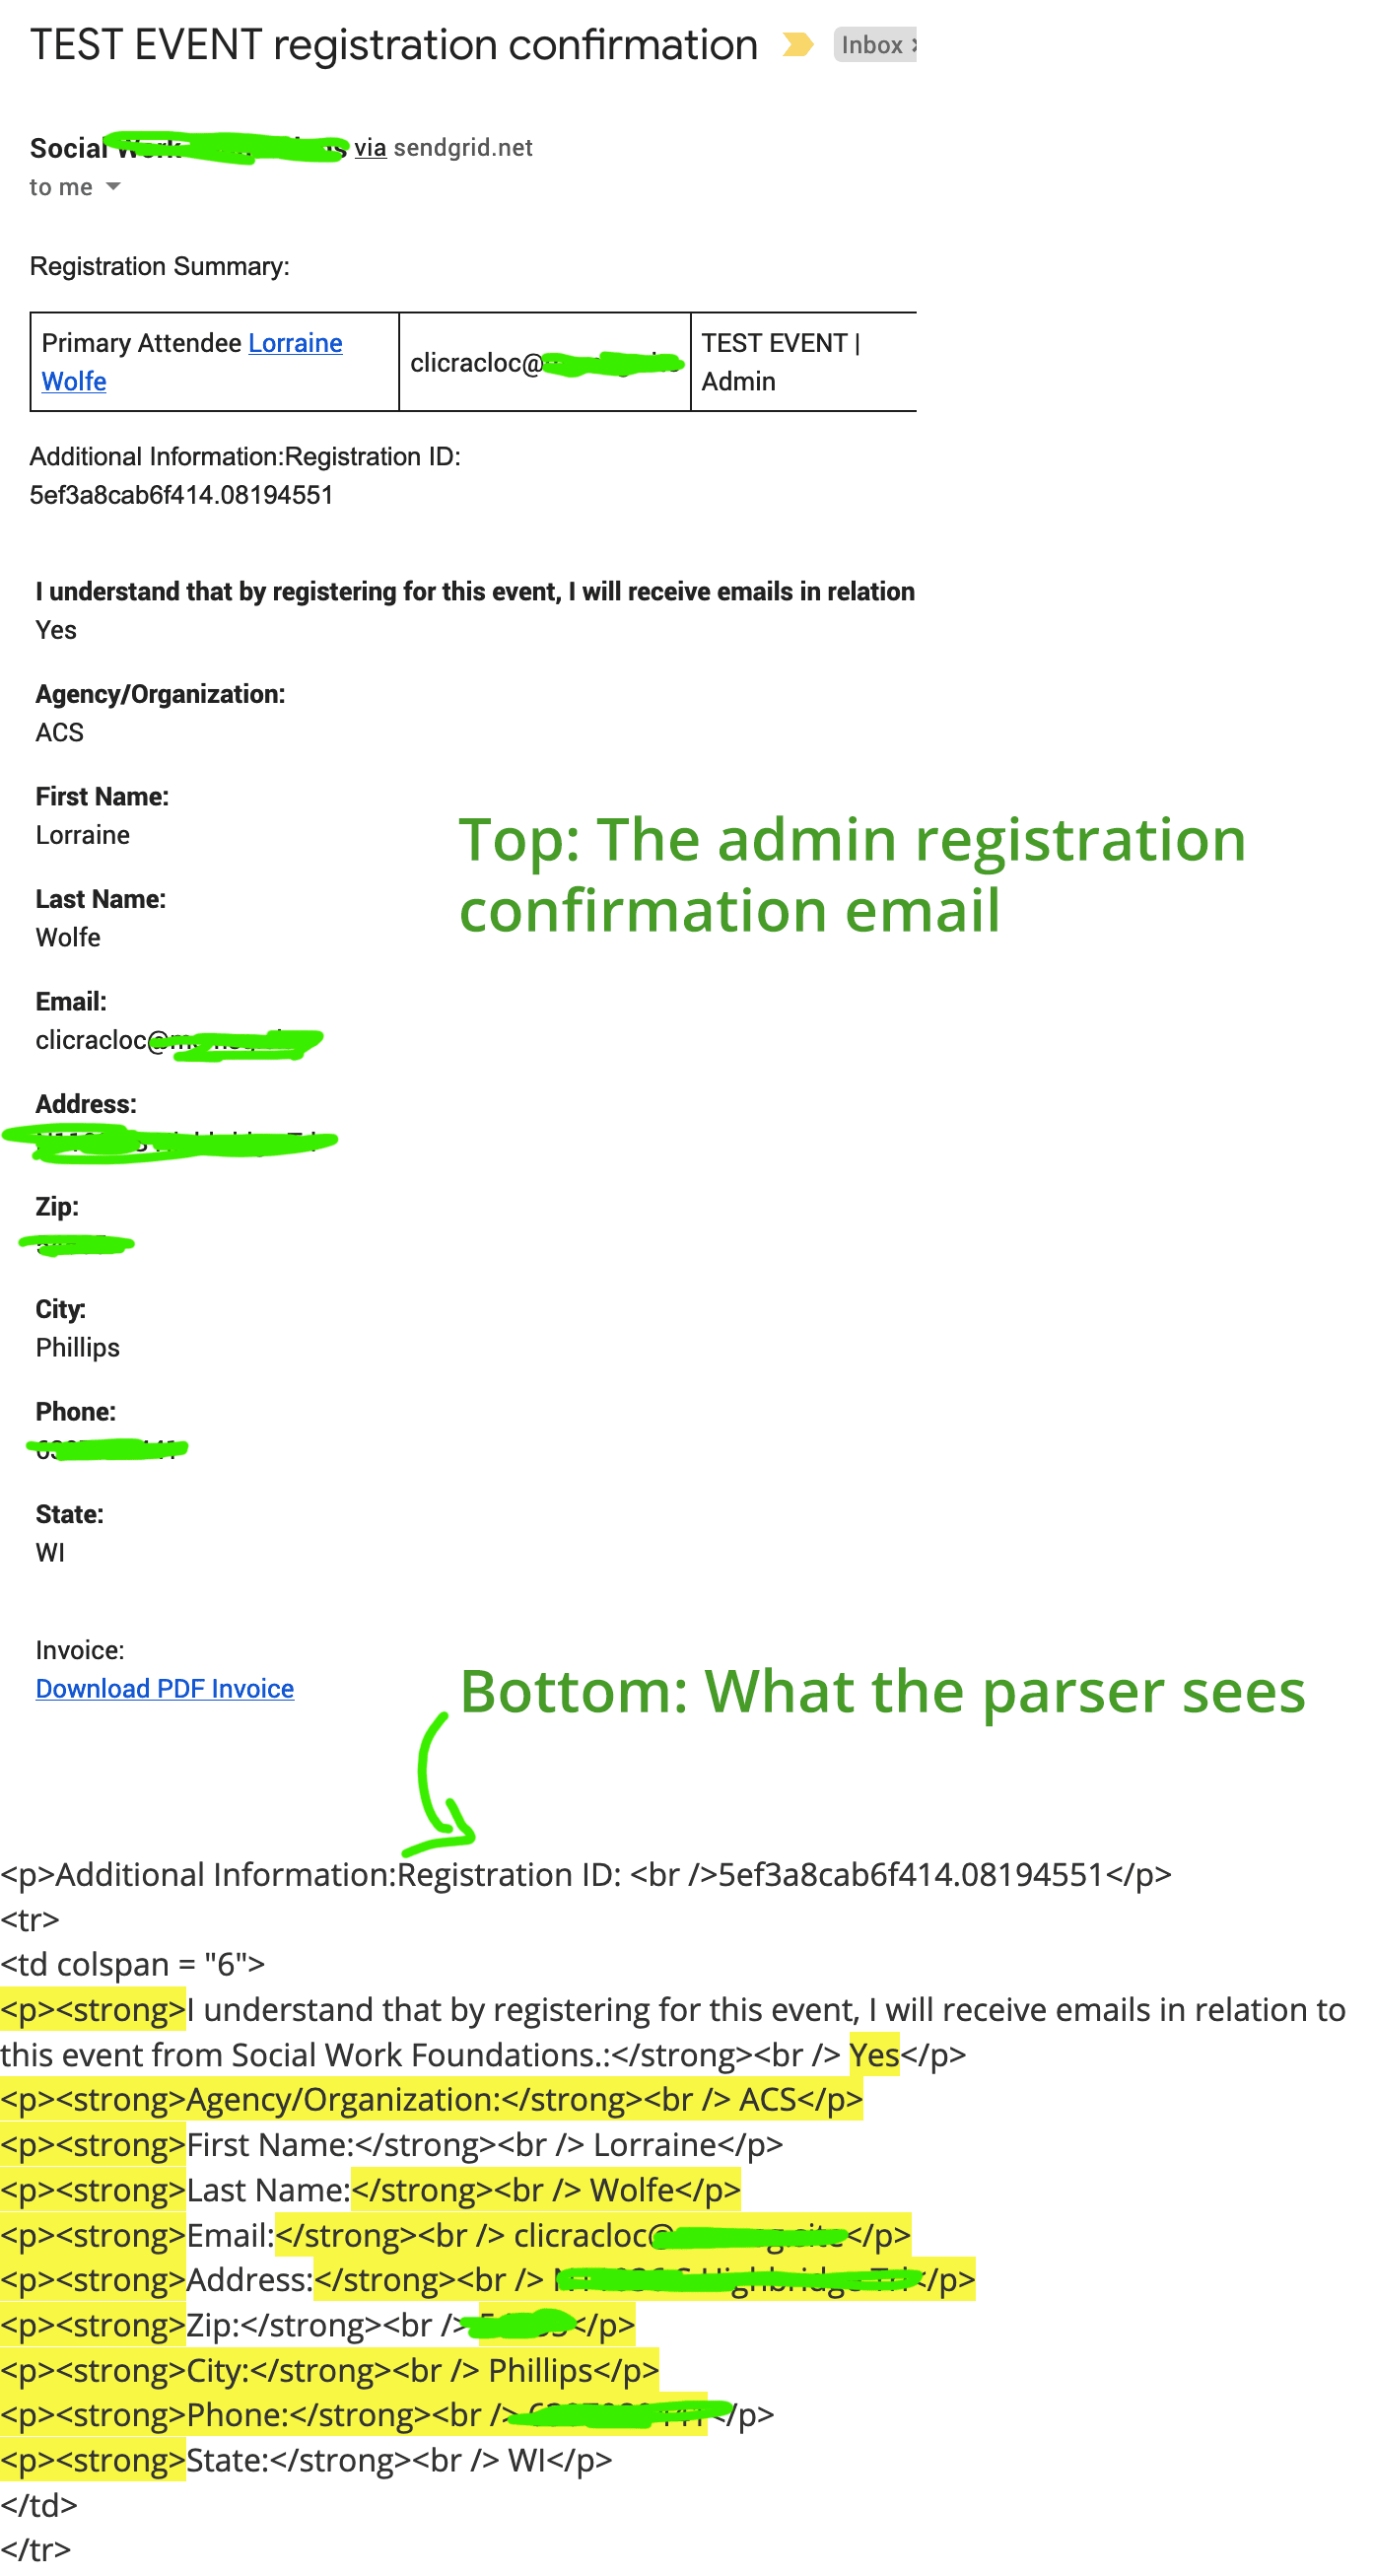 Screenshot showing confirmation email with formatting that makes it hard for parser to understand